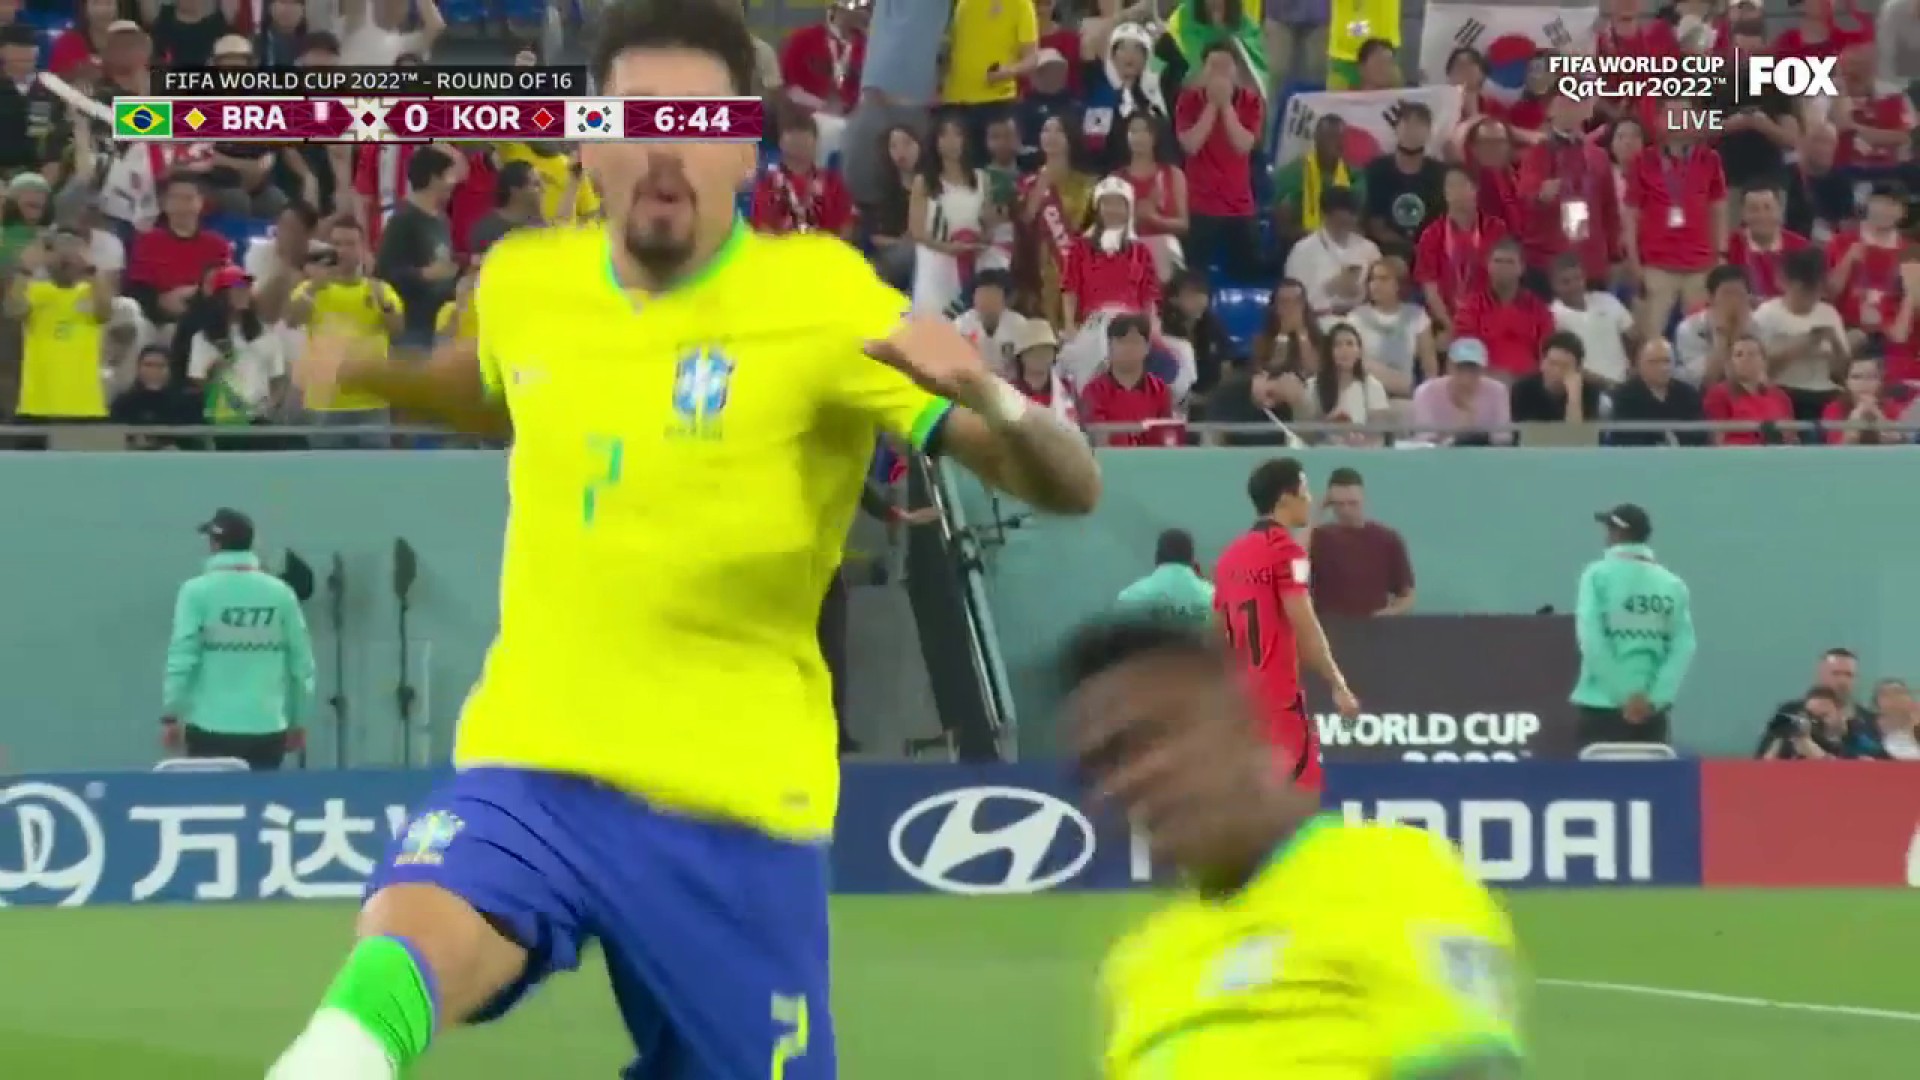 It took just 7 minutes for Brazil to take the lead ⚡️

Vinícius Júnior gives Brazil the lead 🇧🇷”